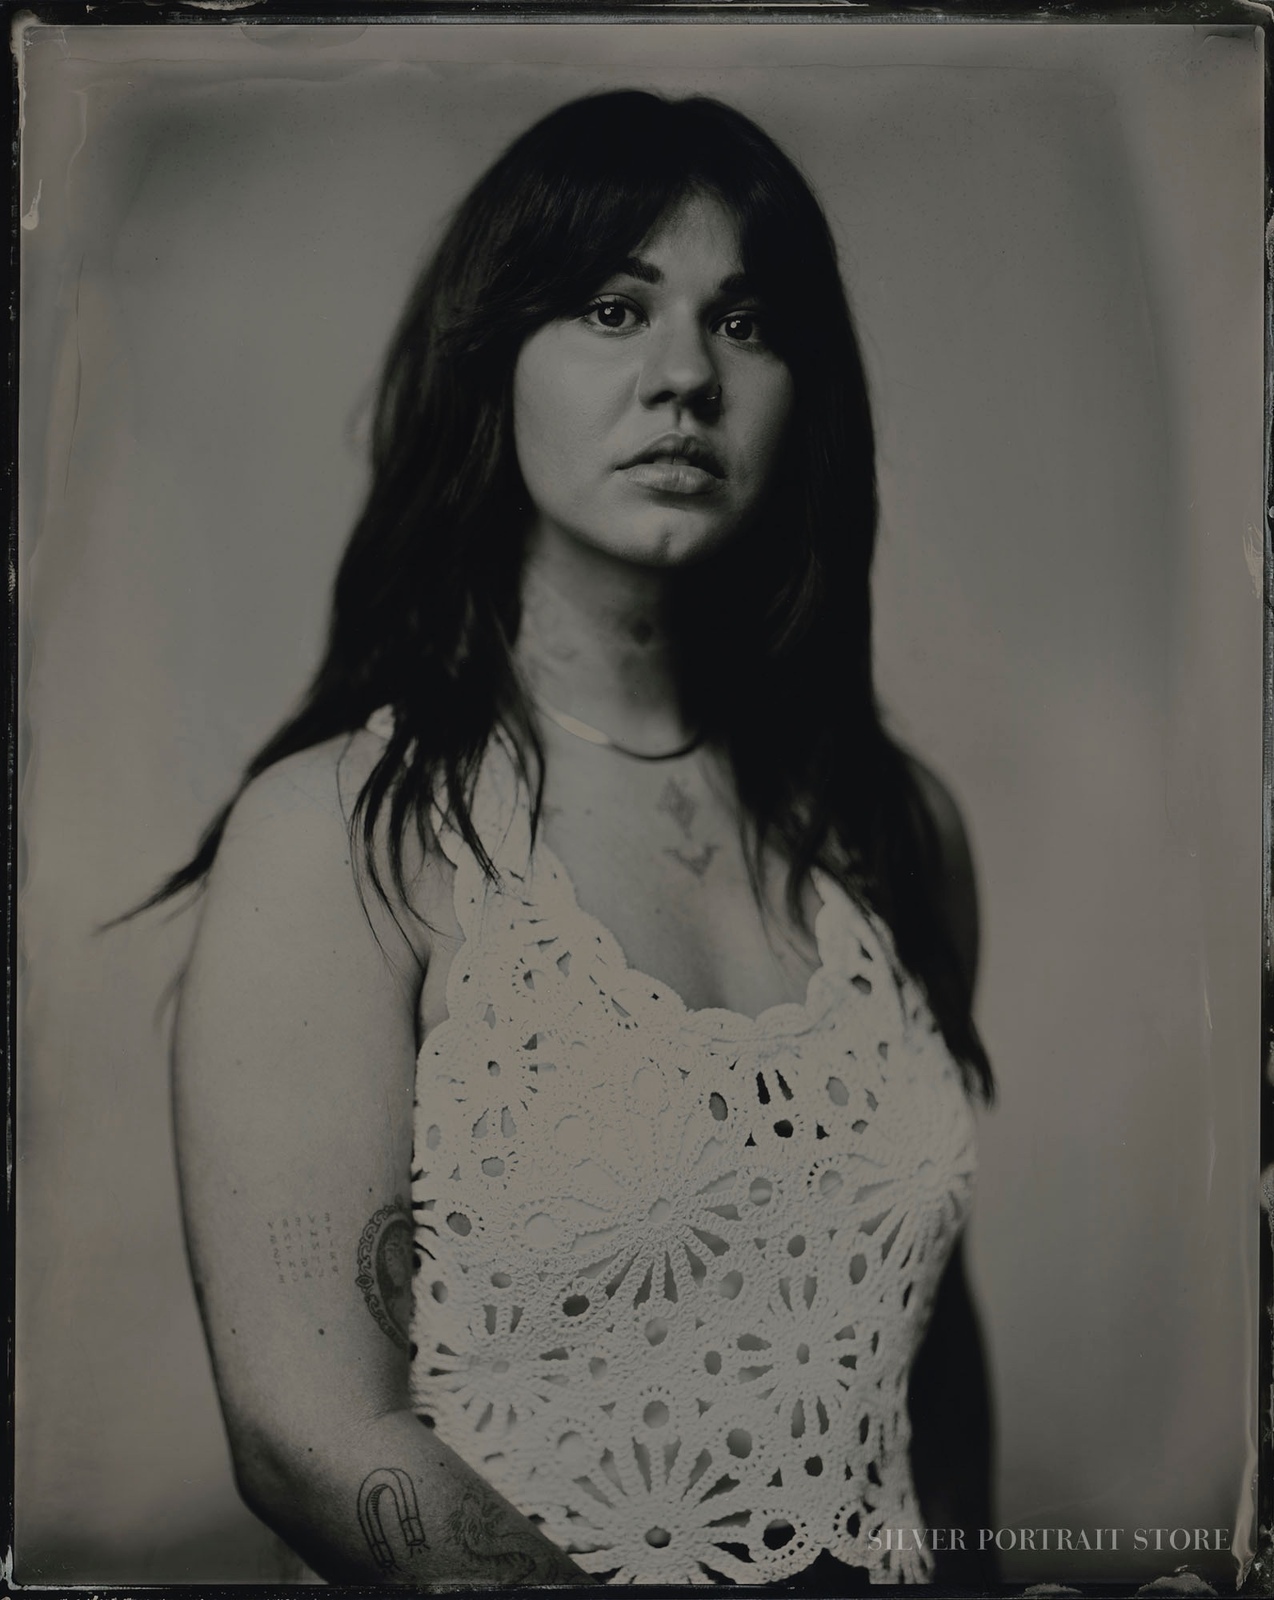 Carrie-Silver Portrait Store-Wet plate collodion-Tintype 20 x 25 cm.